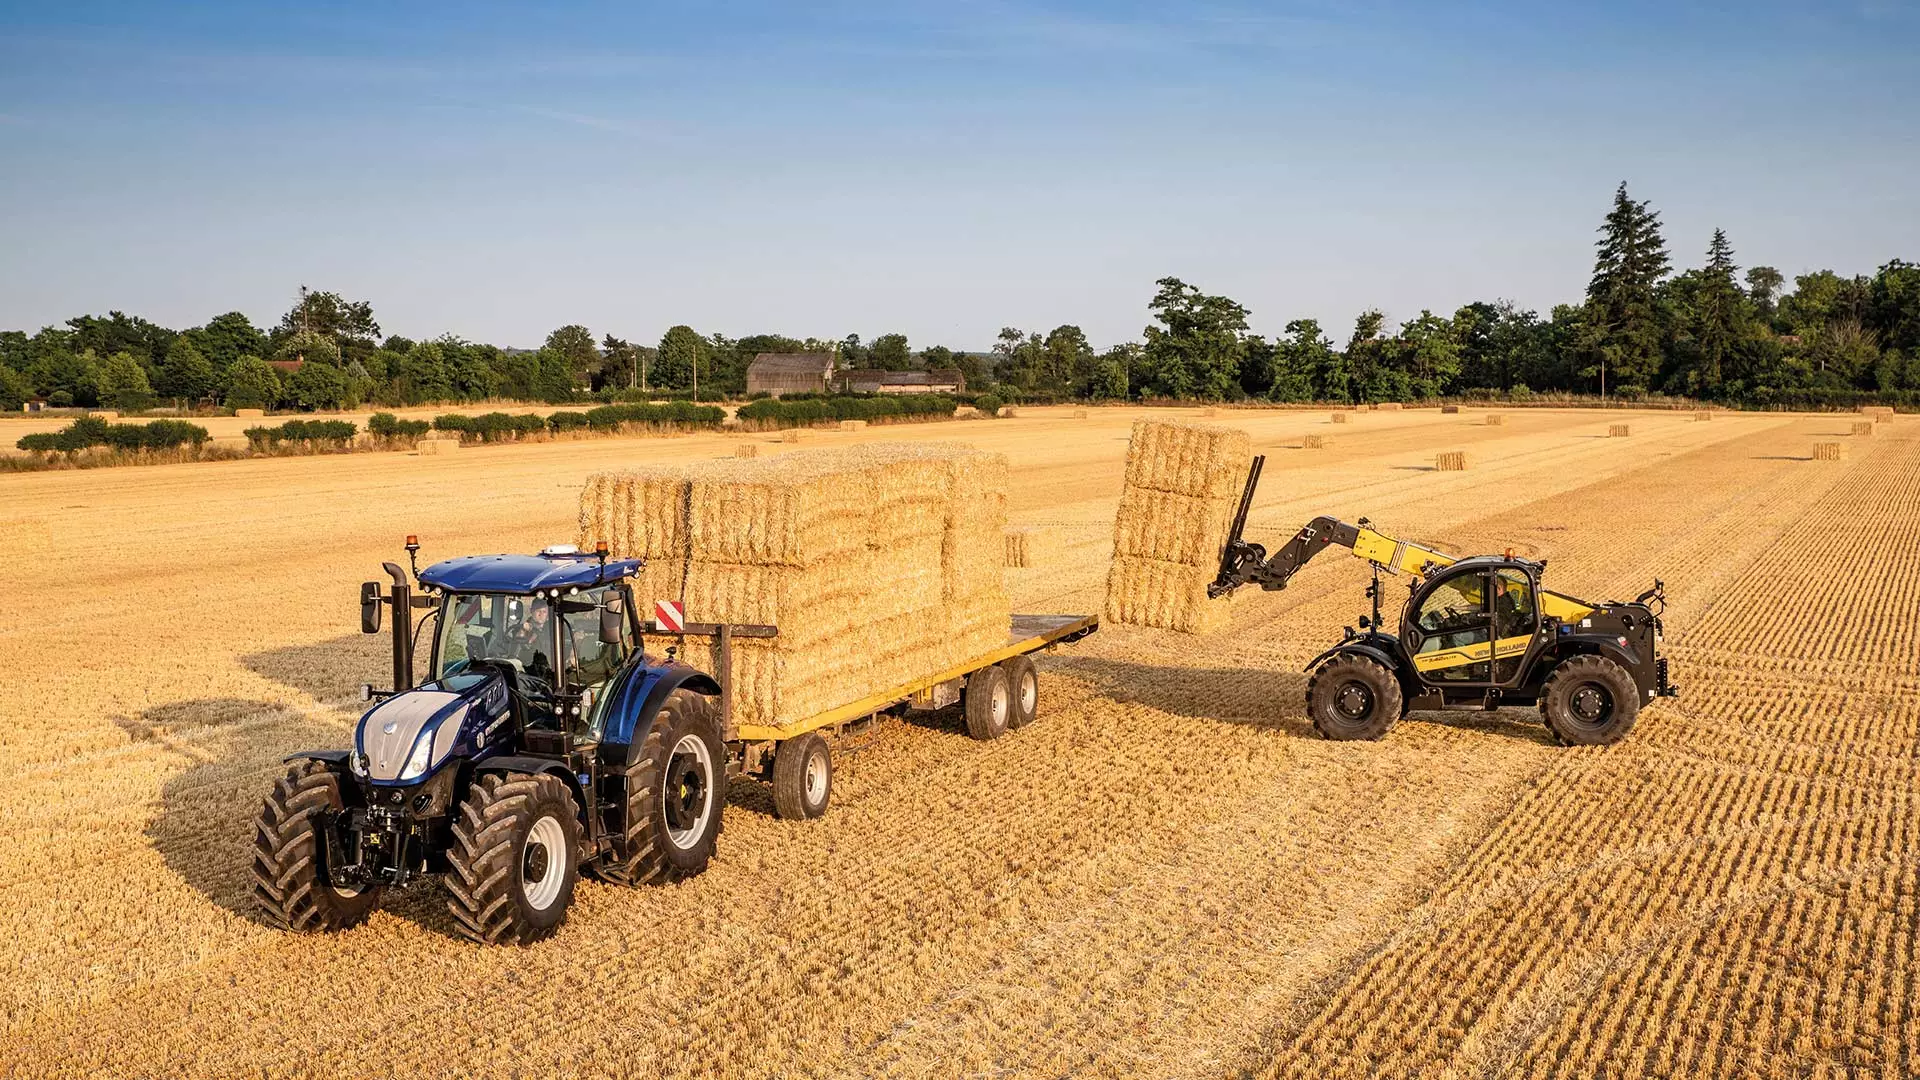 New Holland compact telehandler TH in action loading straw bales onto a trailer in a harvested field.